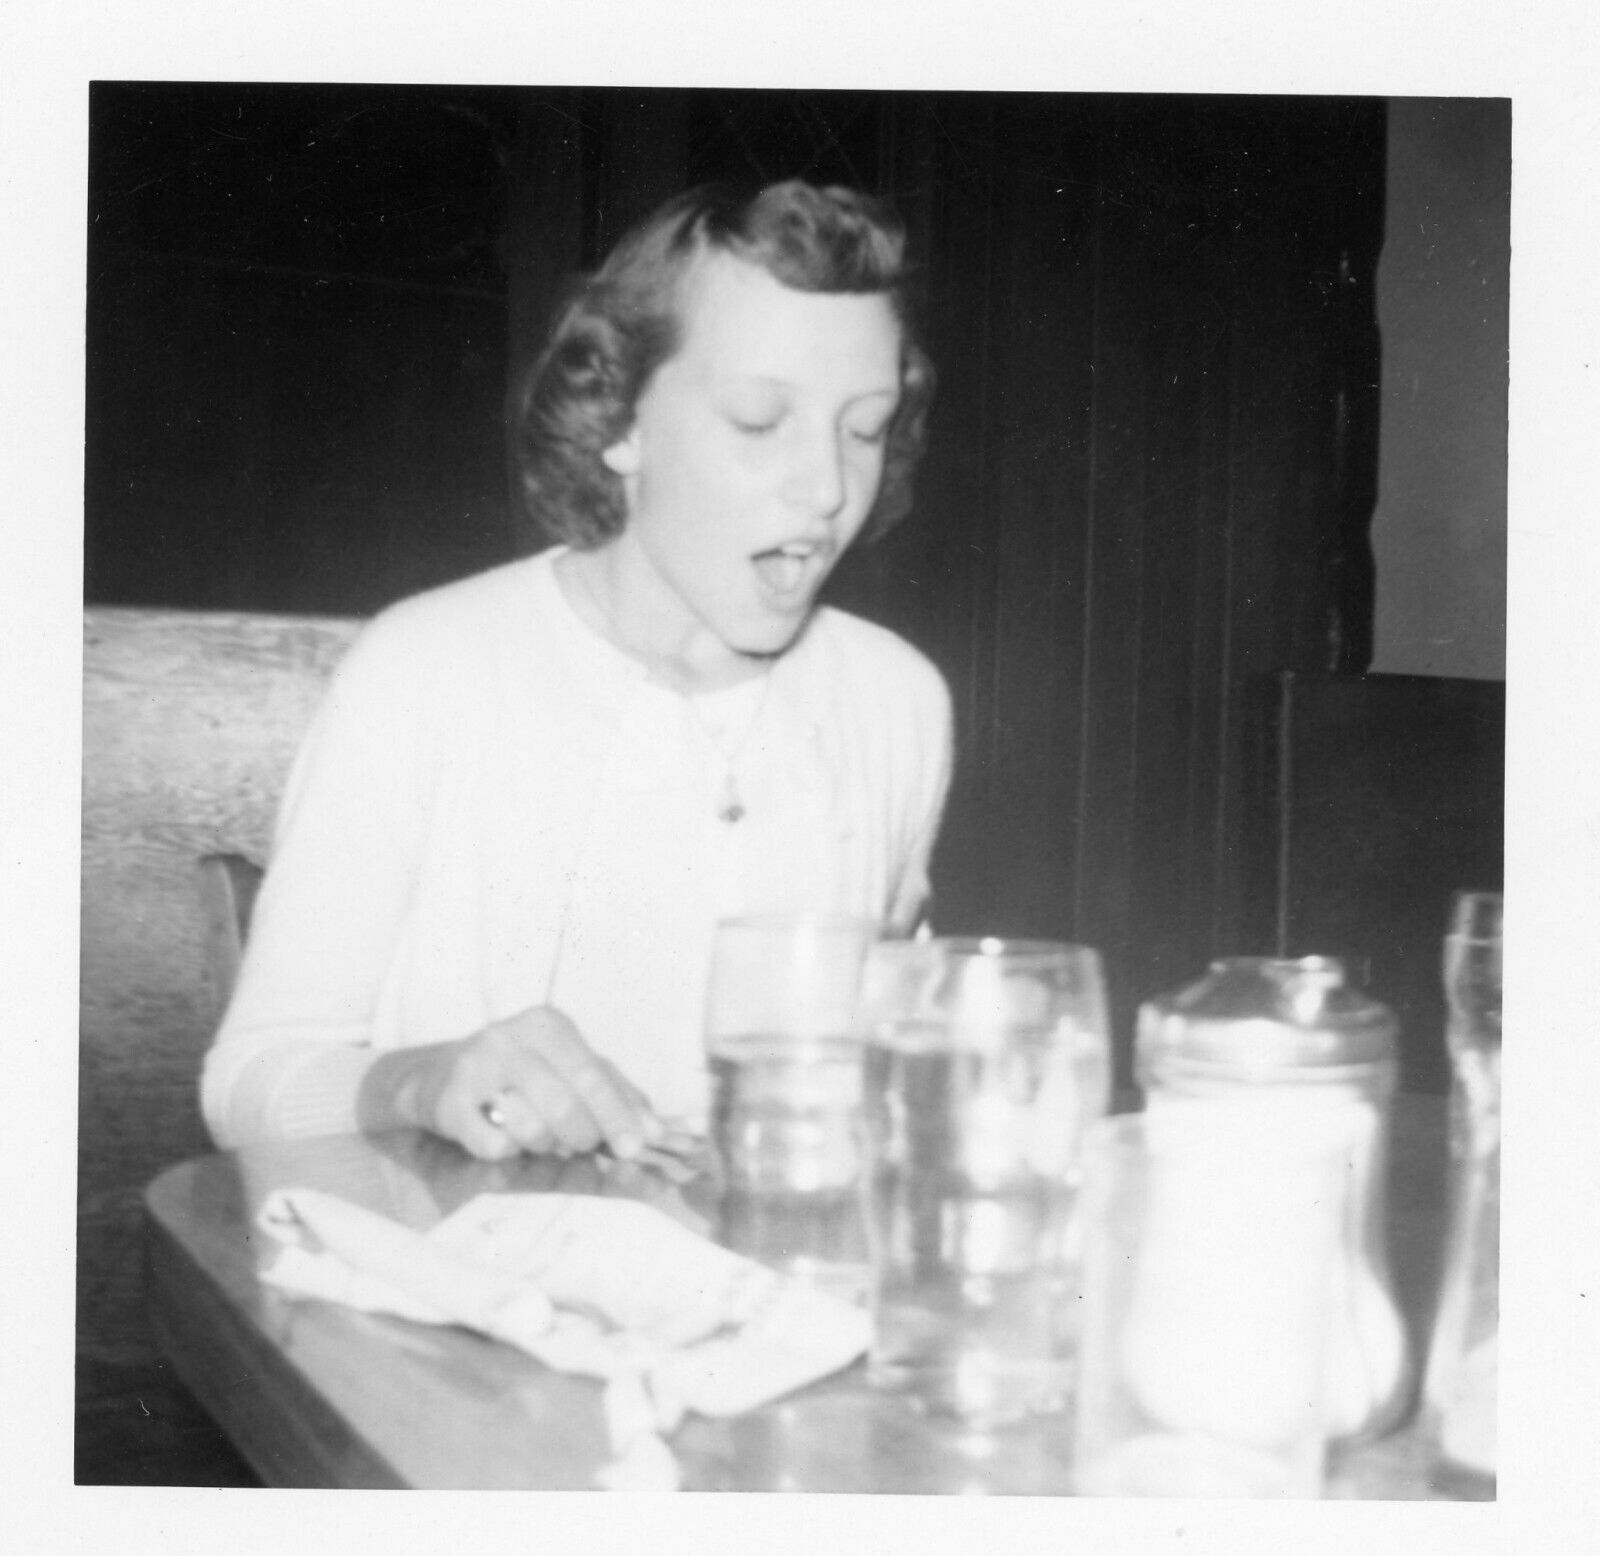 Found Photo Excited Woman in a Diner 1950s Hairstyle Original Vintage